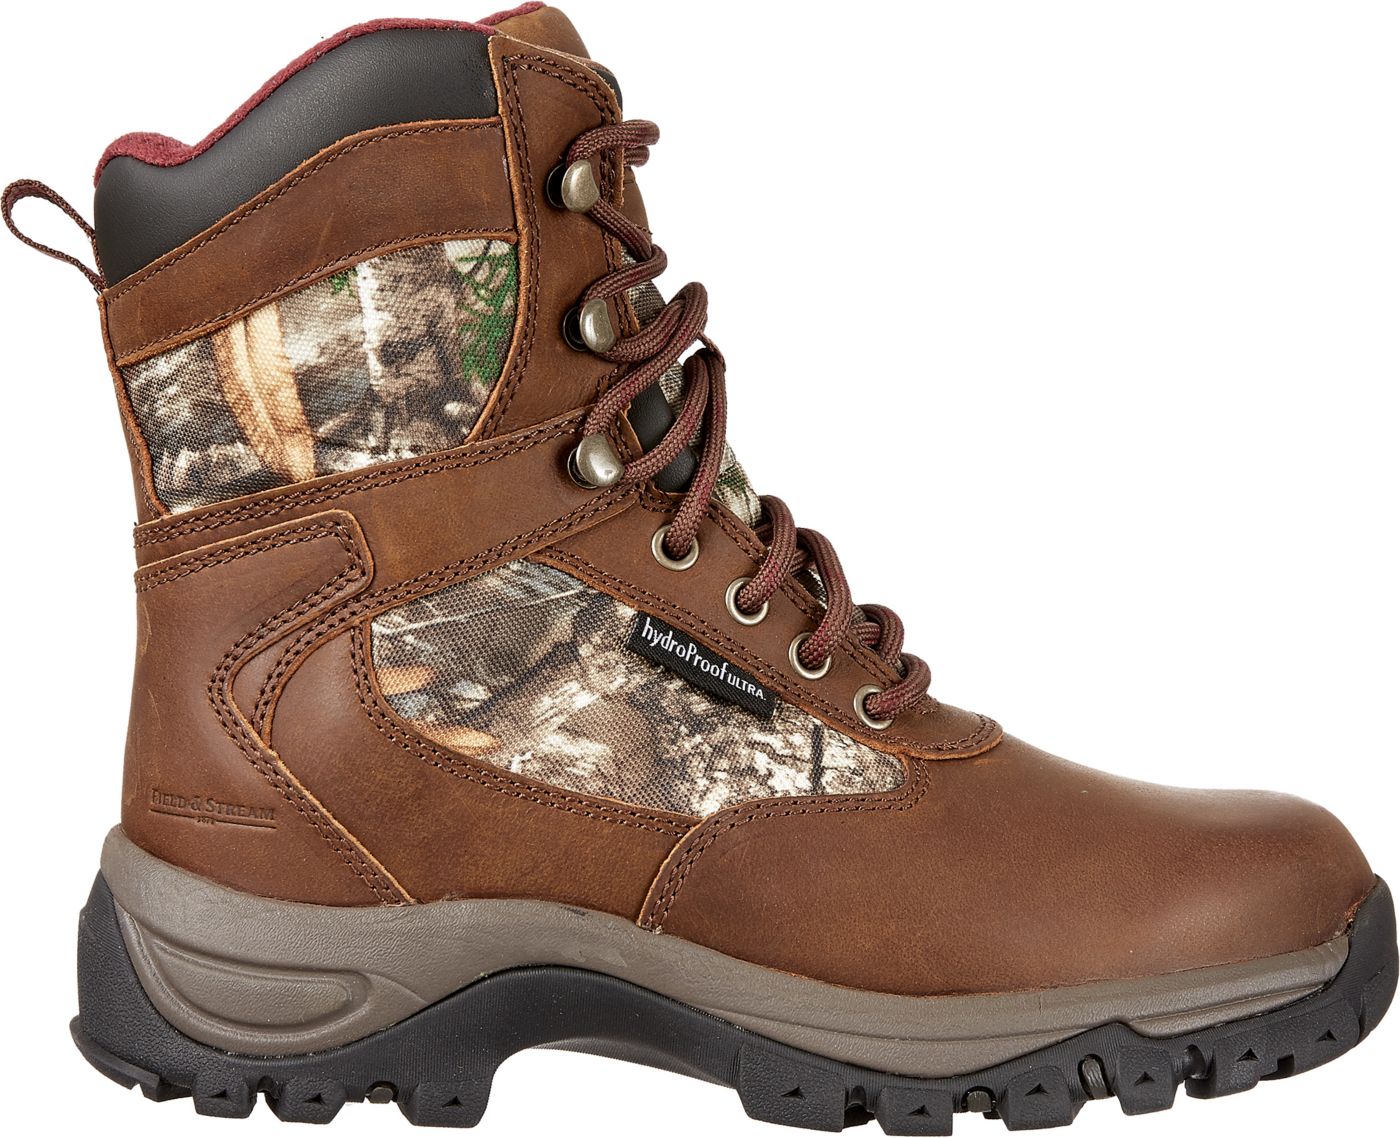 Field & Stream Women's Game Trail 800g Waterproof Hunting Boots DICK